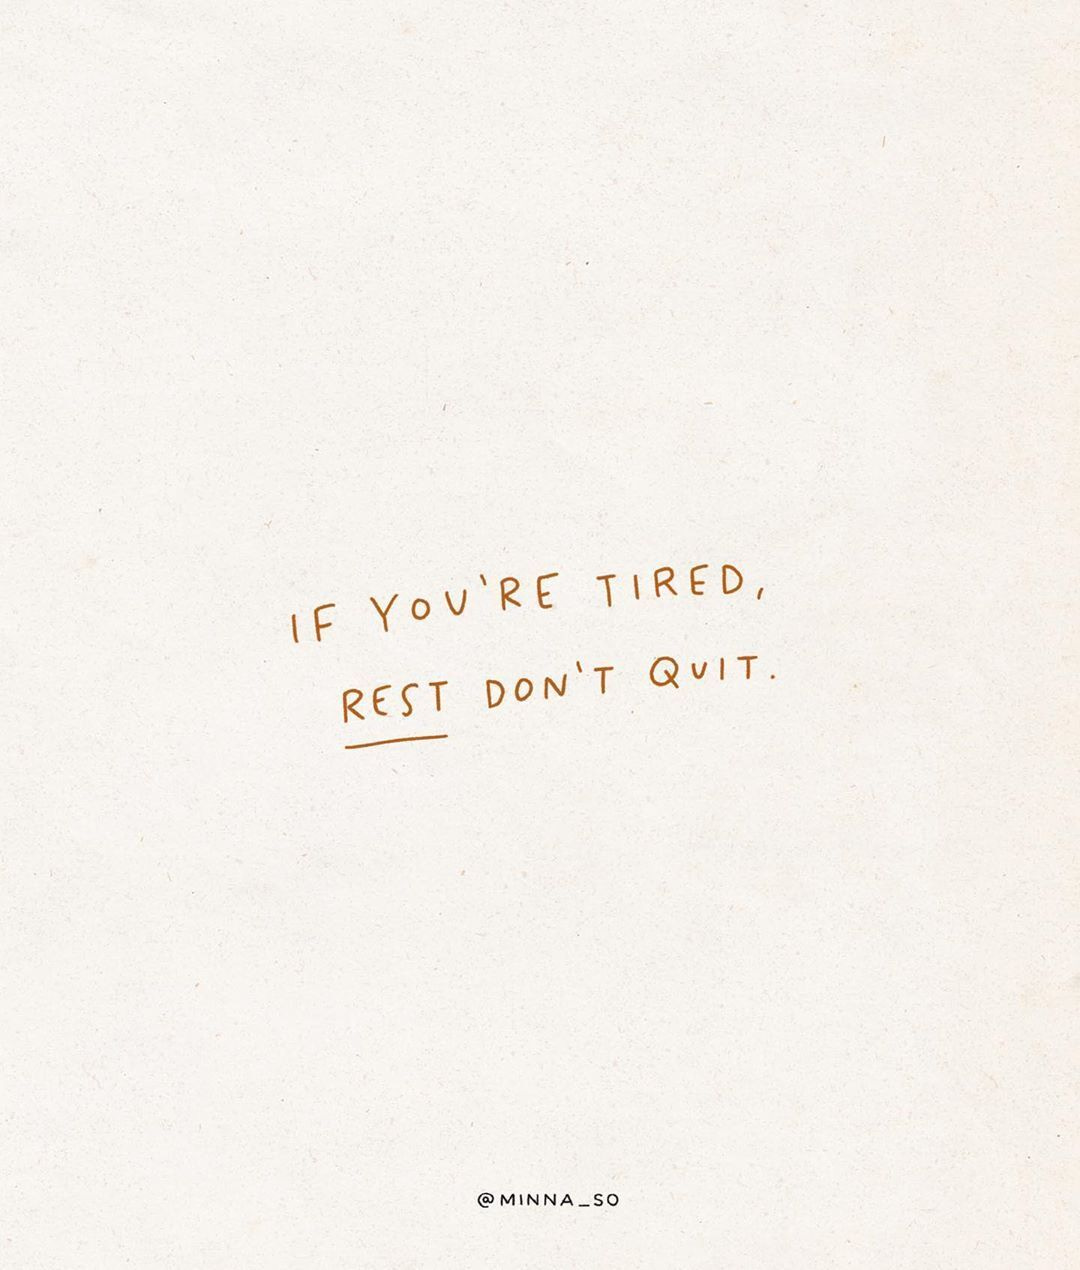 Handscrawled words appear against a grainy white background, reading "if you're tired, rest don't quit."